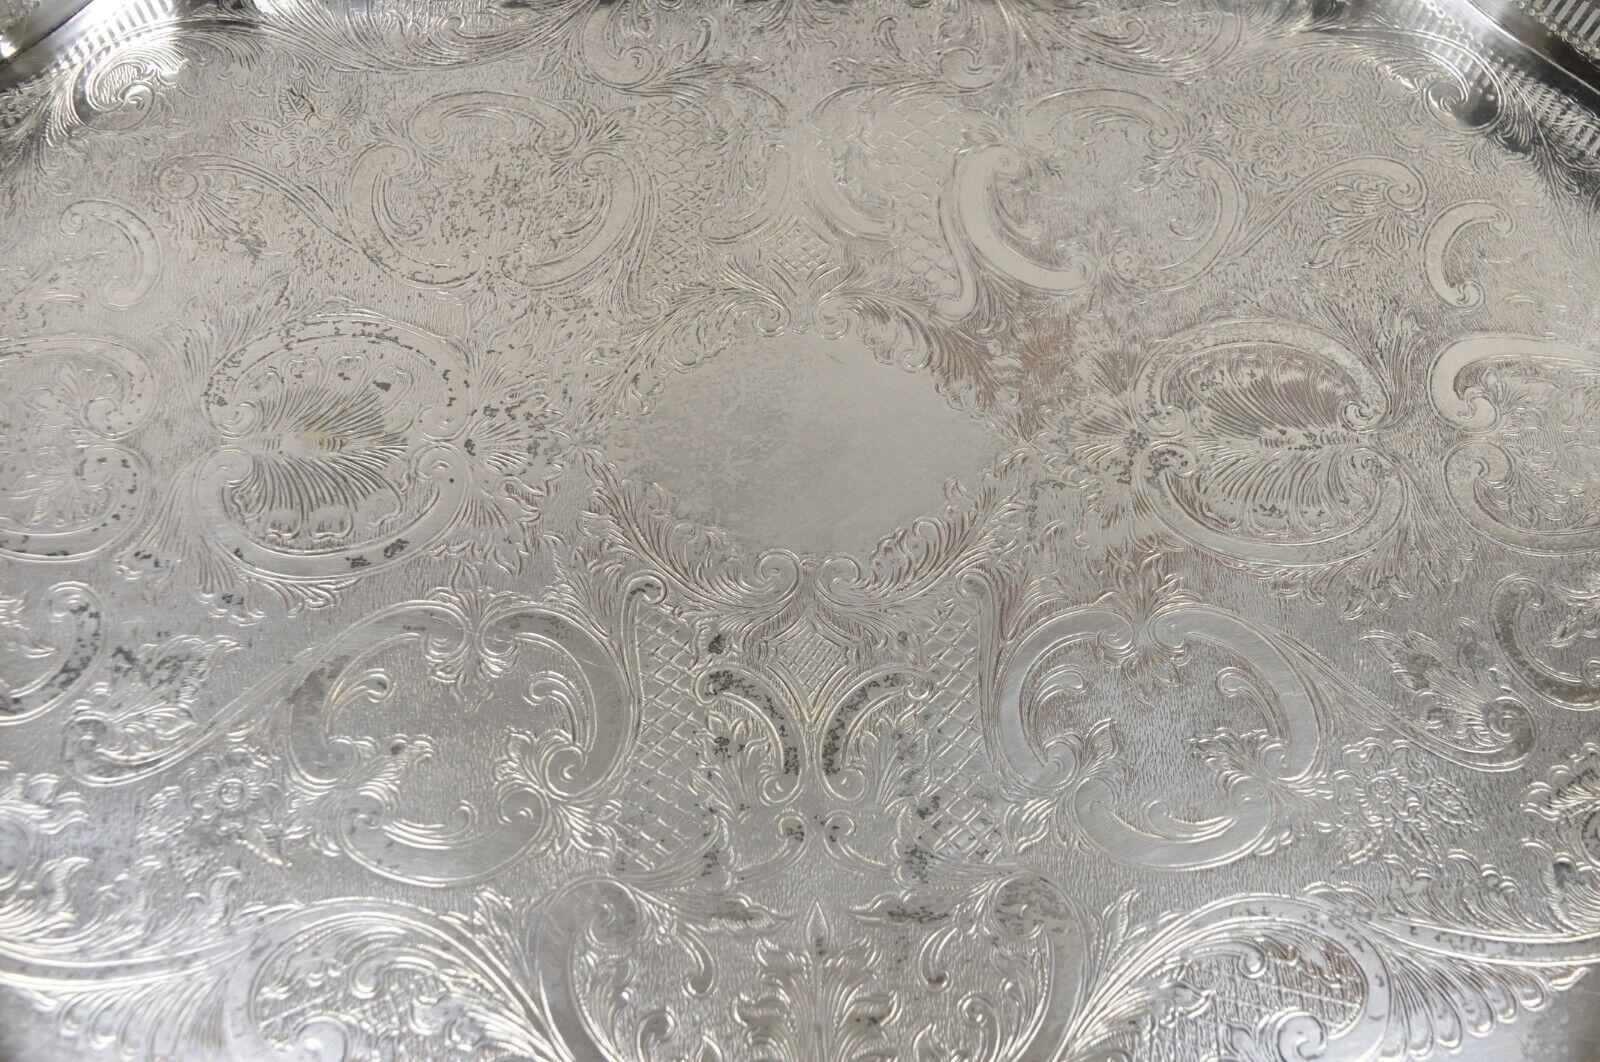 Vintage Victorian Silver Plated Pierced Gallery Scalloped Serving Platter Tray 2